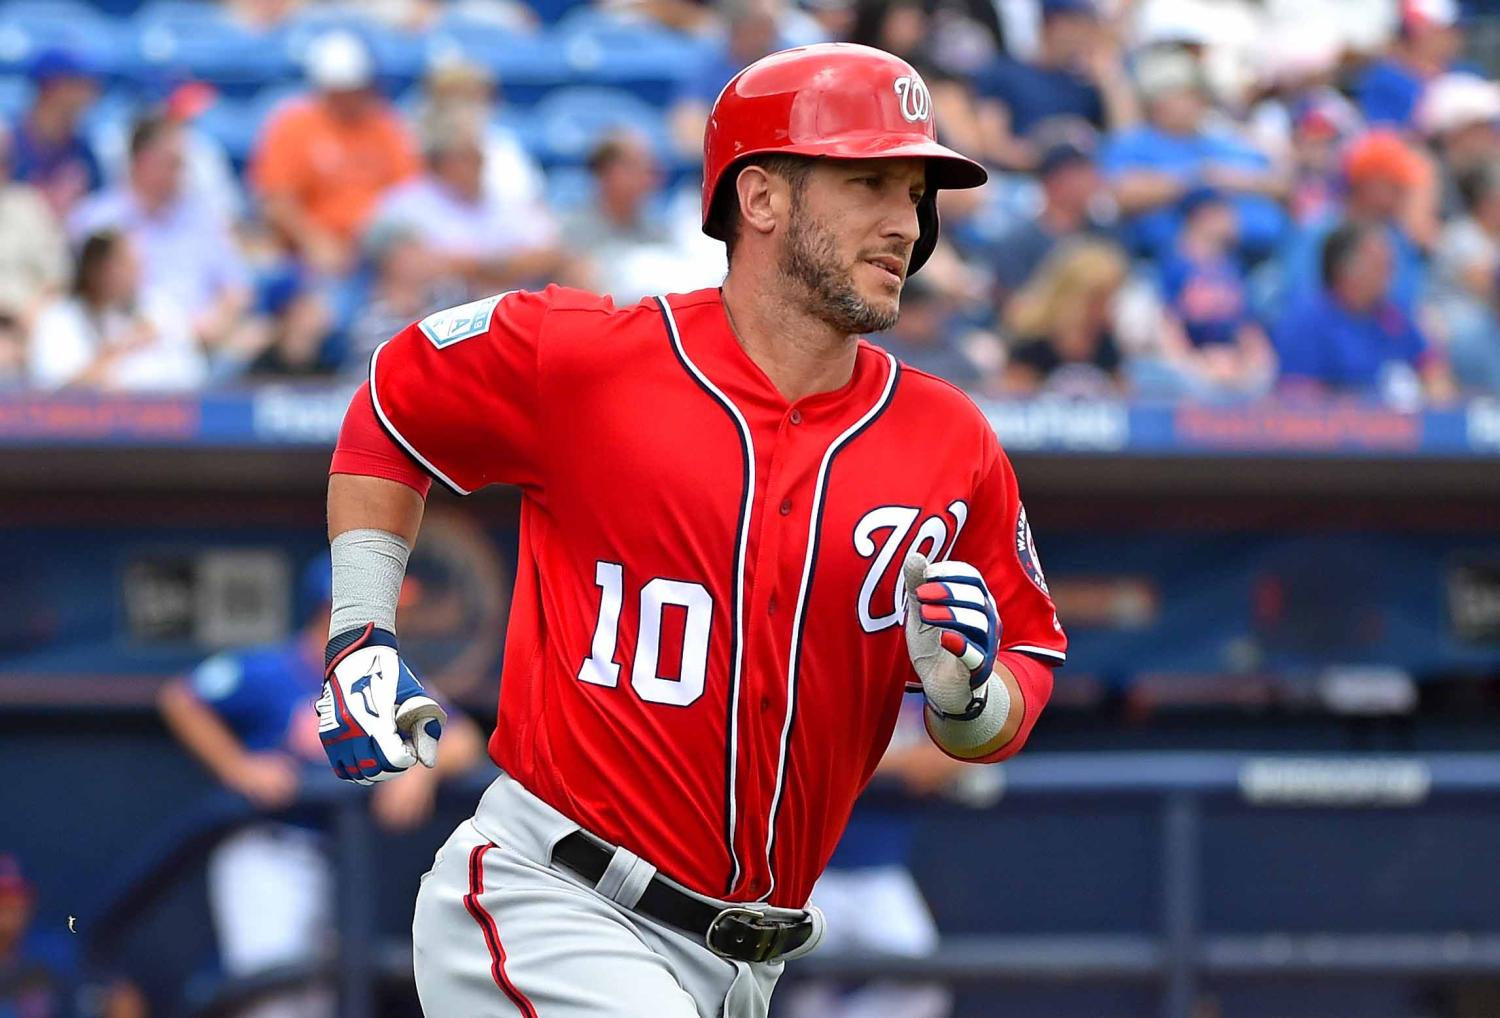 Mar 15, 2019; Port St. Lucie, FL, USA; Washington Nationals catcher Yan Gomes (10) rounds the bases after connecting for a three run homer during a spring training game against the New York Mets at First Data Field. Mandatory Credit: Steve Mitchell-USA TODAY Sports - 12352962